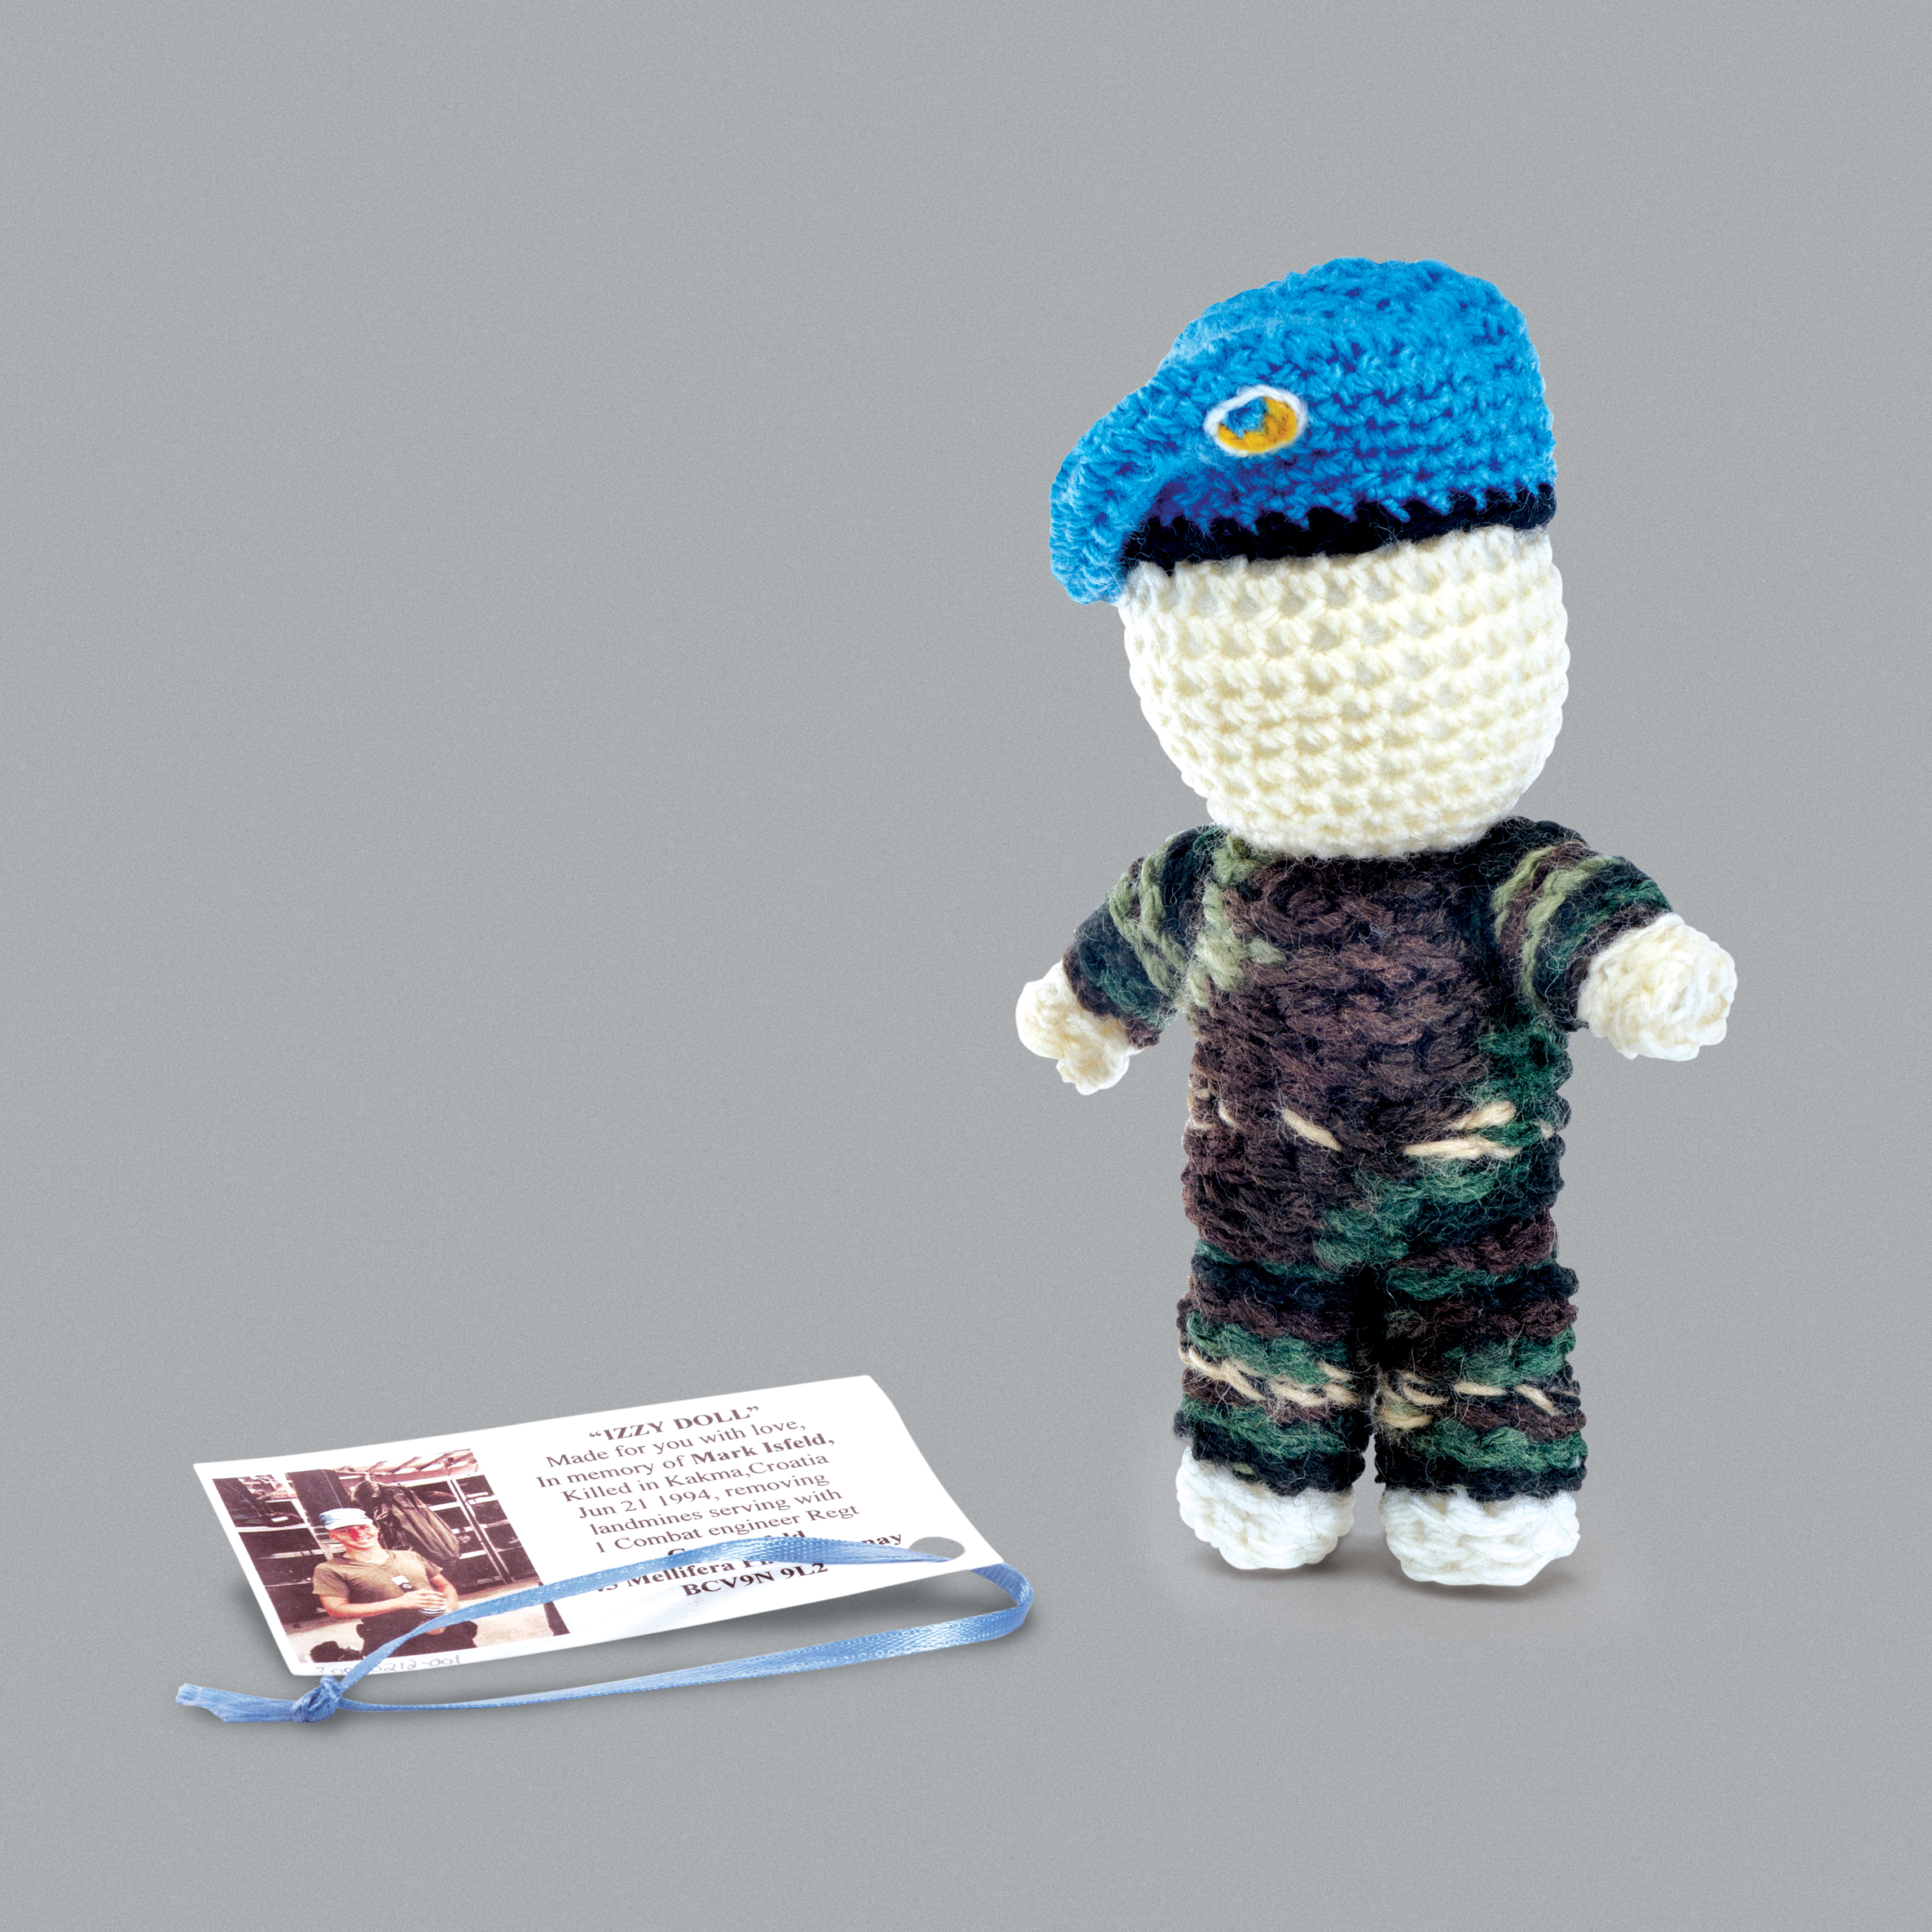 Small knitted doll to look like a Canadian peacekeeper